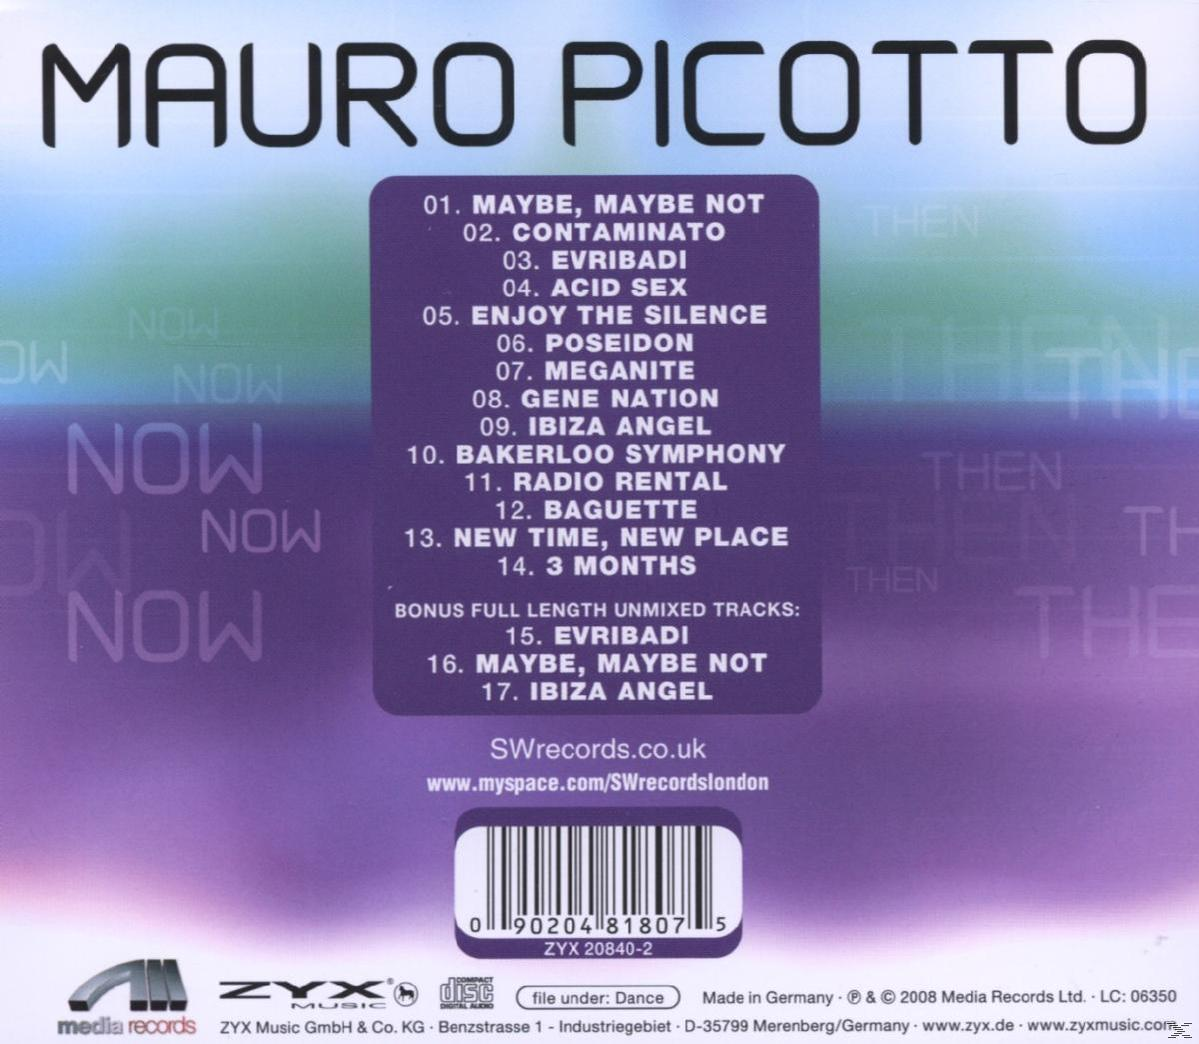 Then Mauro - Picotto Now And - (CD)